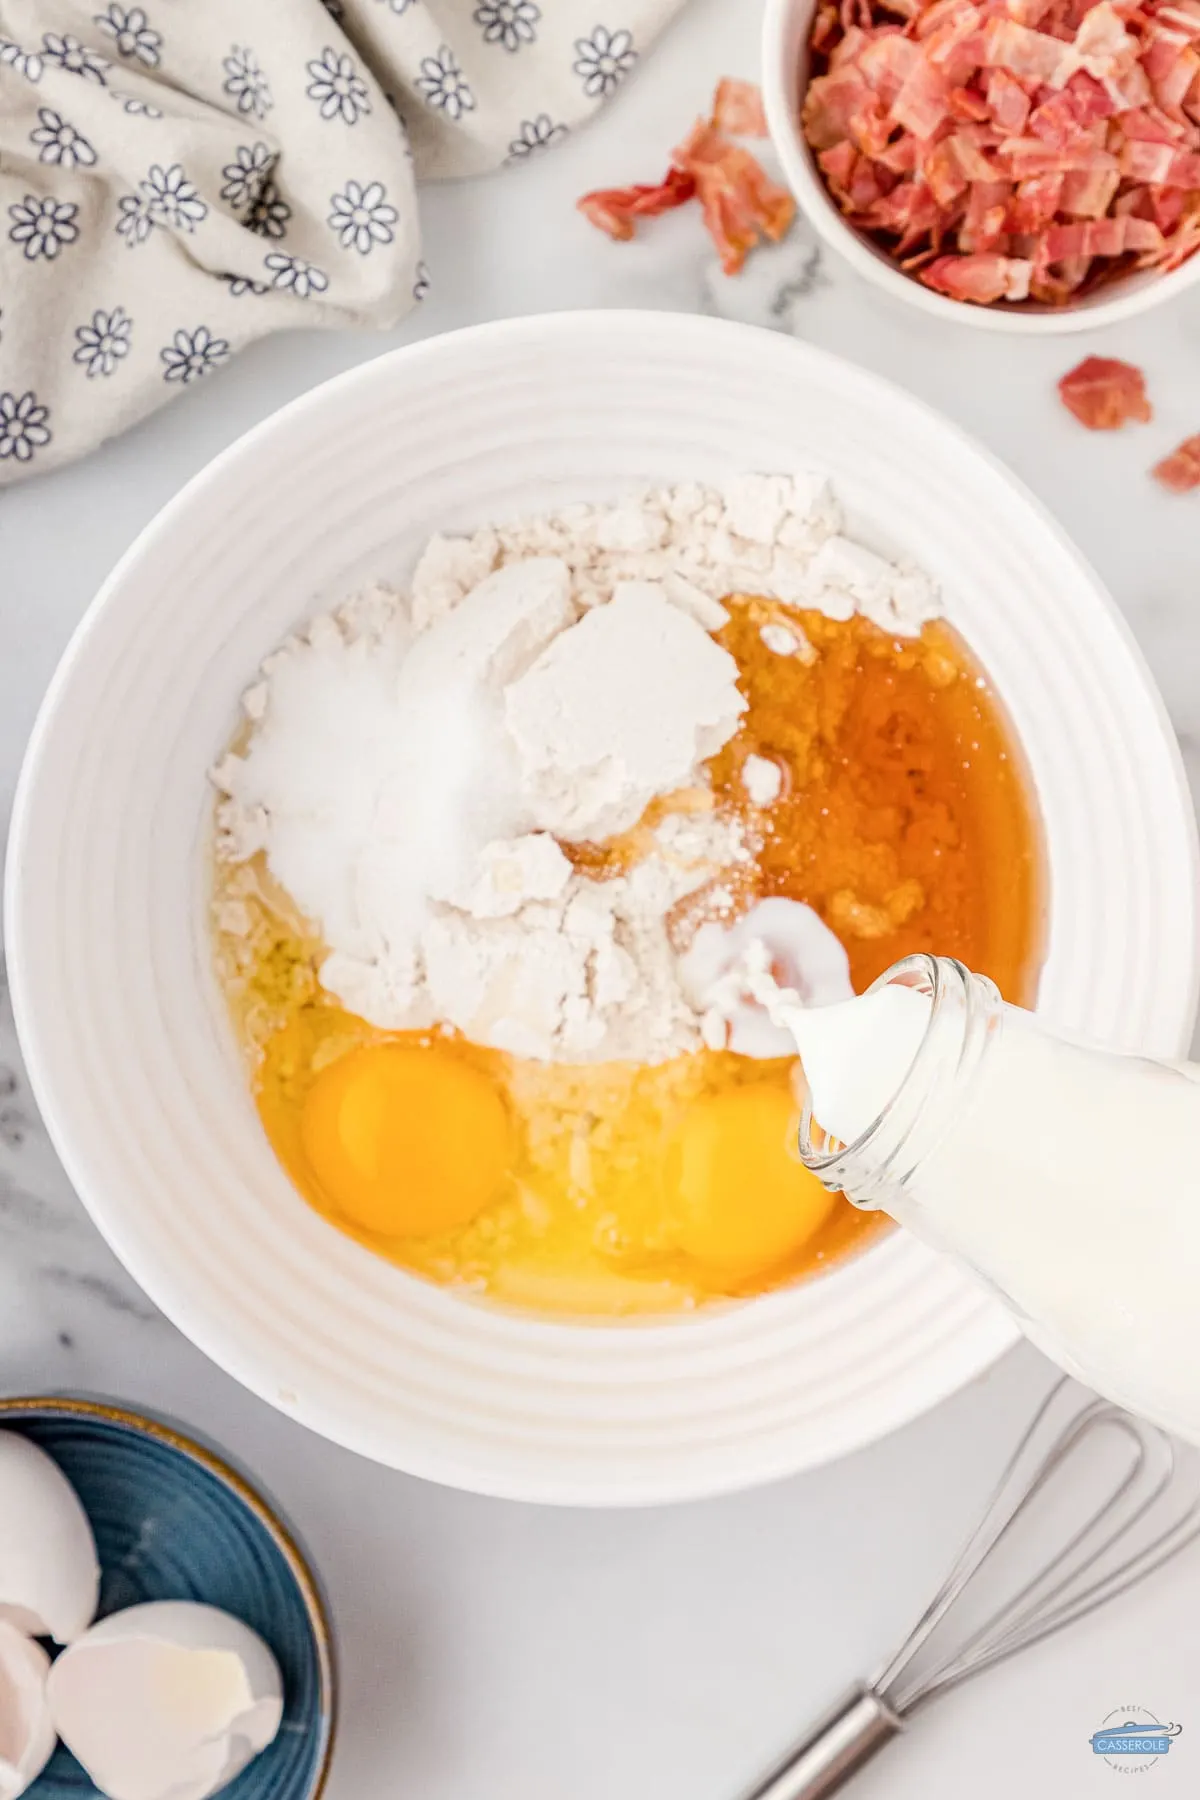 mix melted butter and other dry ingredients in a bowl